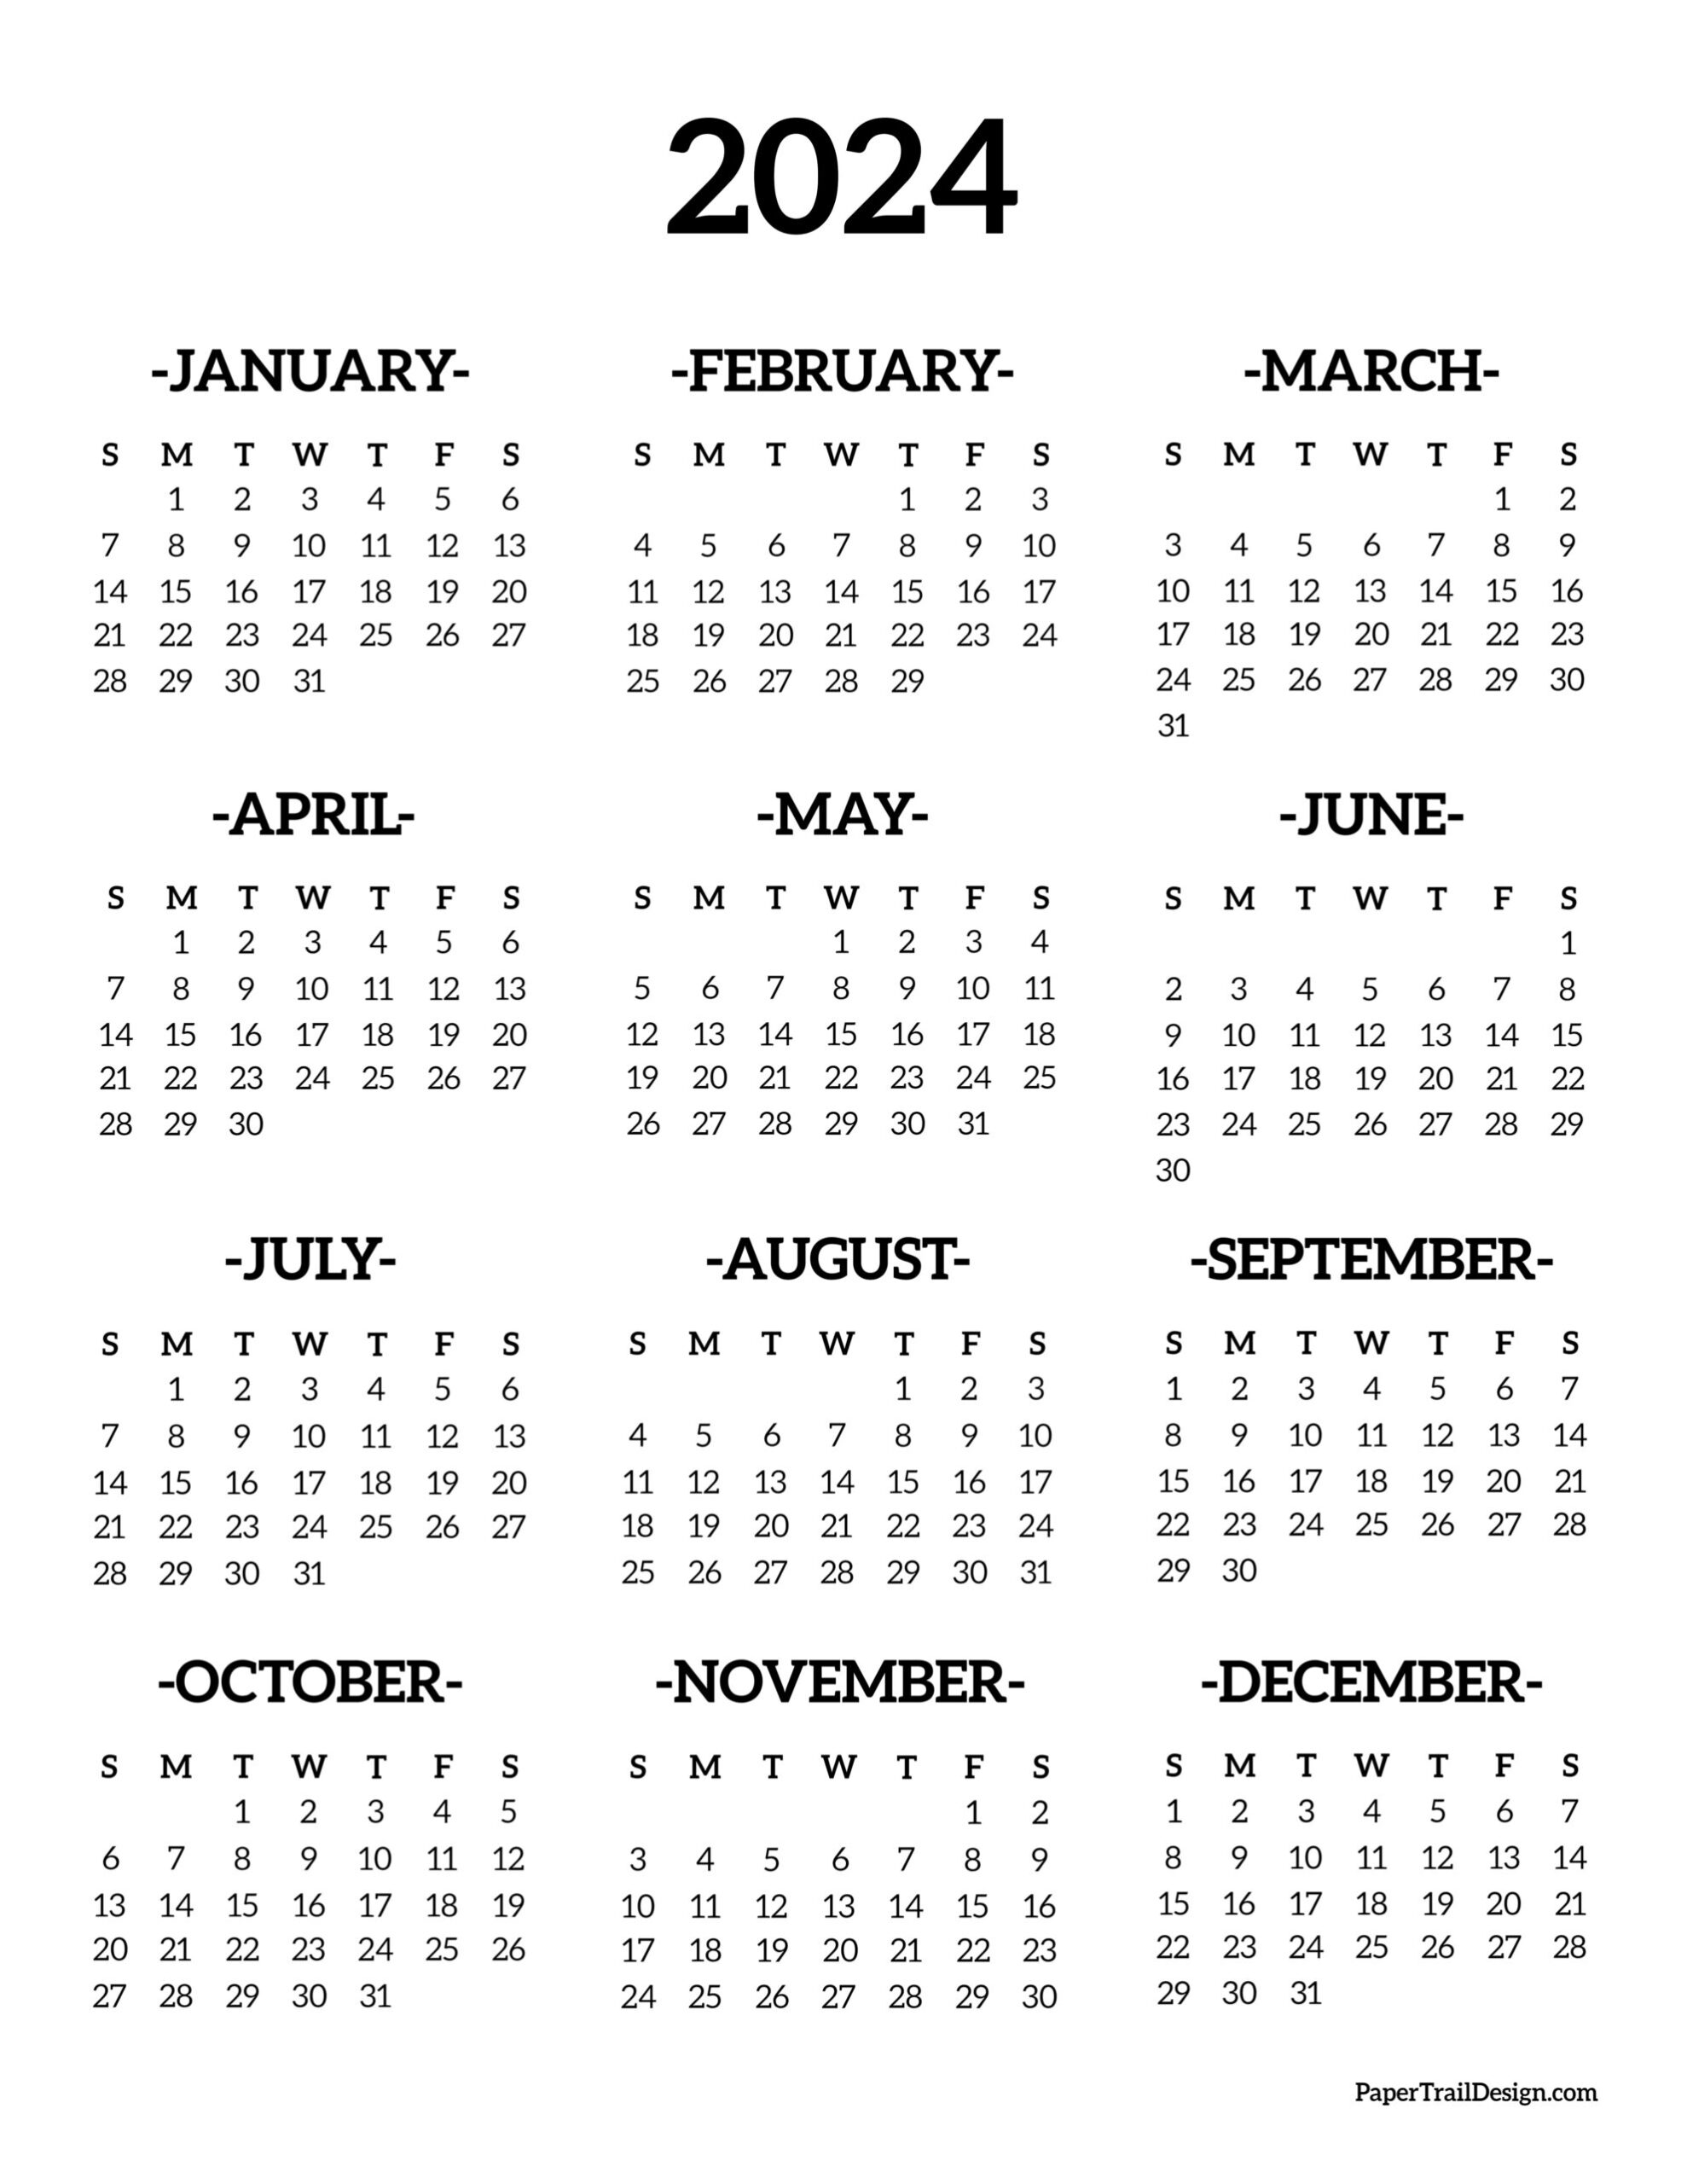 Calendar 2024 Printable One Page - Paper Trail Design for 2024 Printable Full Year Calendar